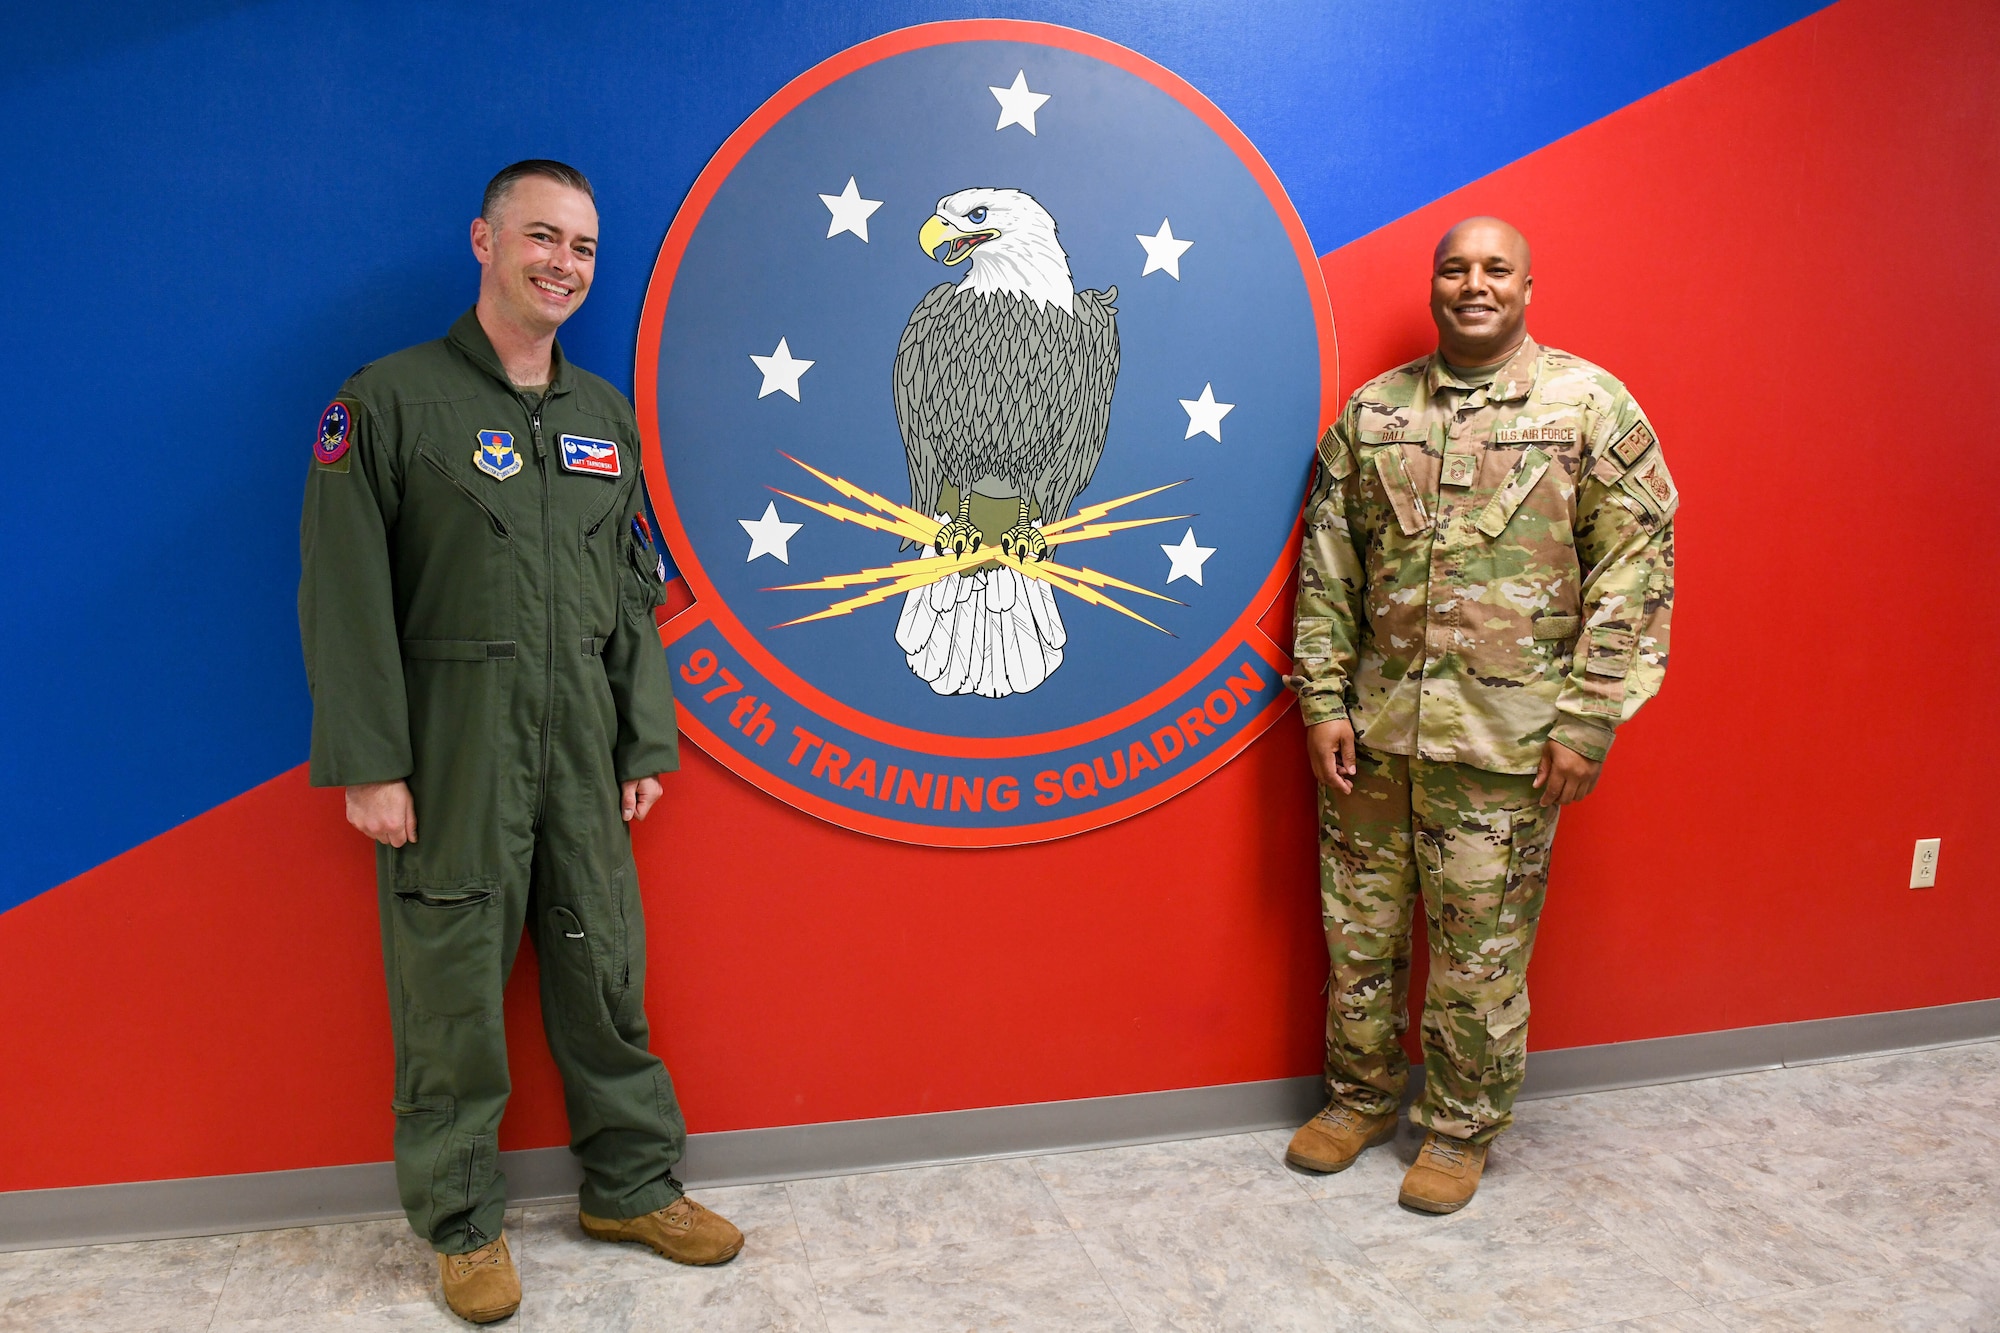 U.S. Air Force Lt. Col. Matthew Tarnowski, 97th Training Squadron (TRS) commander, and Senior Master Sgt. Byron Ball, 97th Civil Engineer Squadron deputy fire chief, pose for a photo at Altus Air Force Base, Oklahoma, May 24, 2022. Ball was the first sergeant of the 97th TRS before deploying to Al Jaber Air Base, Kuwait and Al Udeid Air Base, Qatar. (U.S. Air Force photo by Airman 1st Class Trenton Jancze)